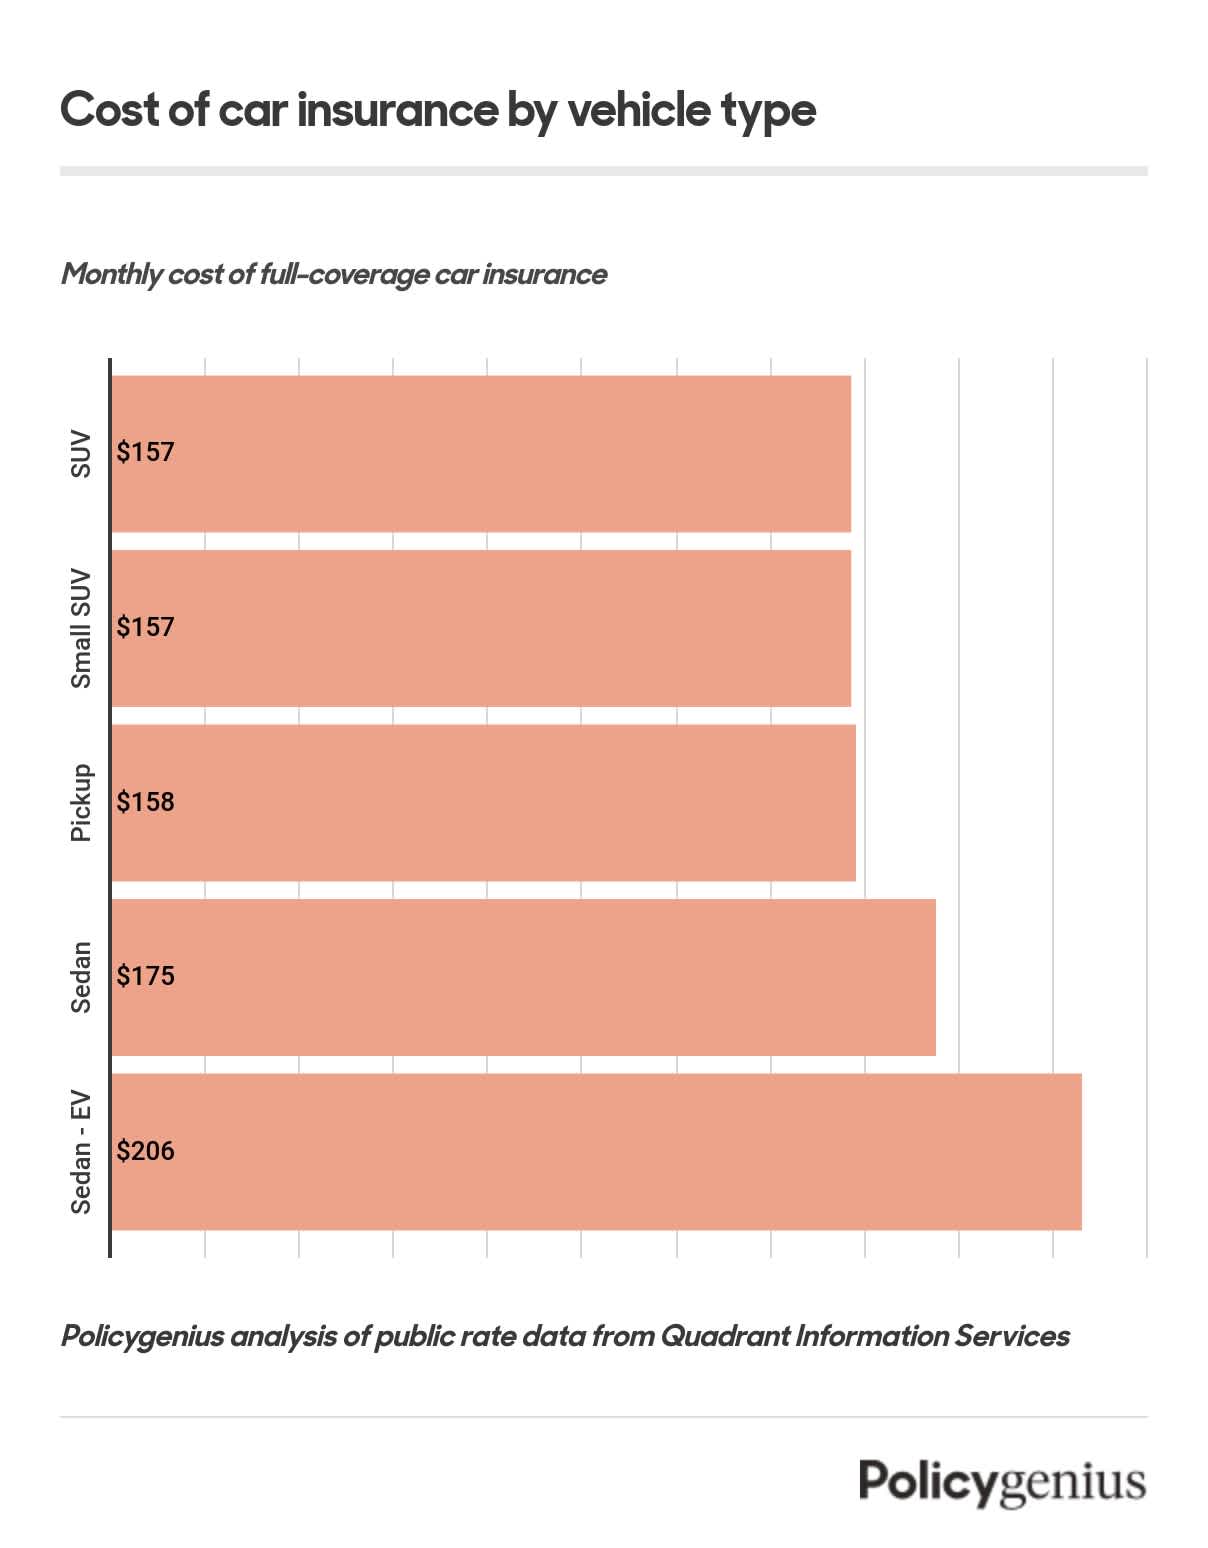 A bar graph showing the cost of car insurance by vehicle type. Pictured are rates for an SUV, small SUV, pickup truck, sedan, and electric sedan.